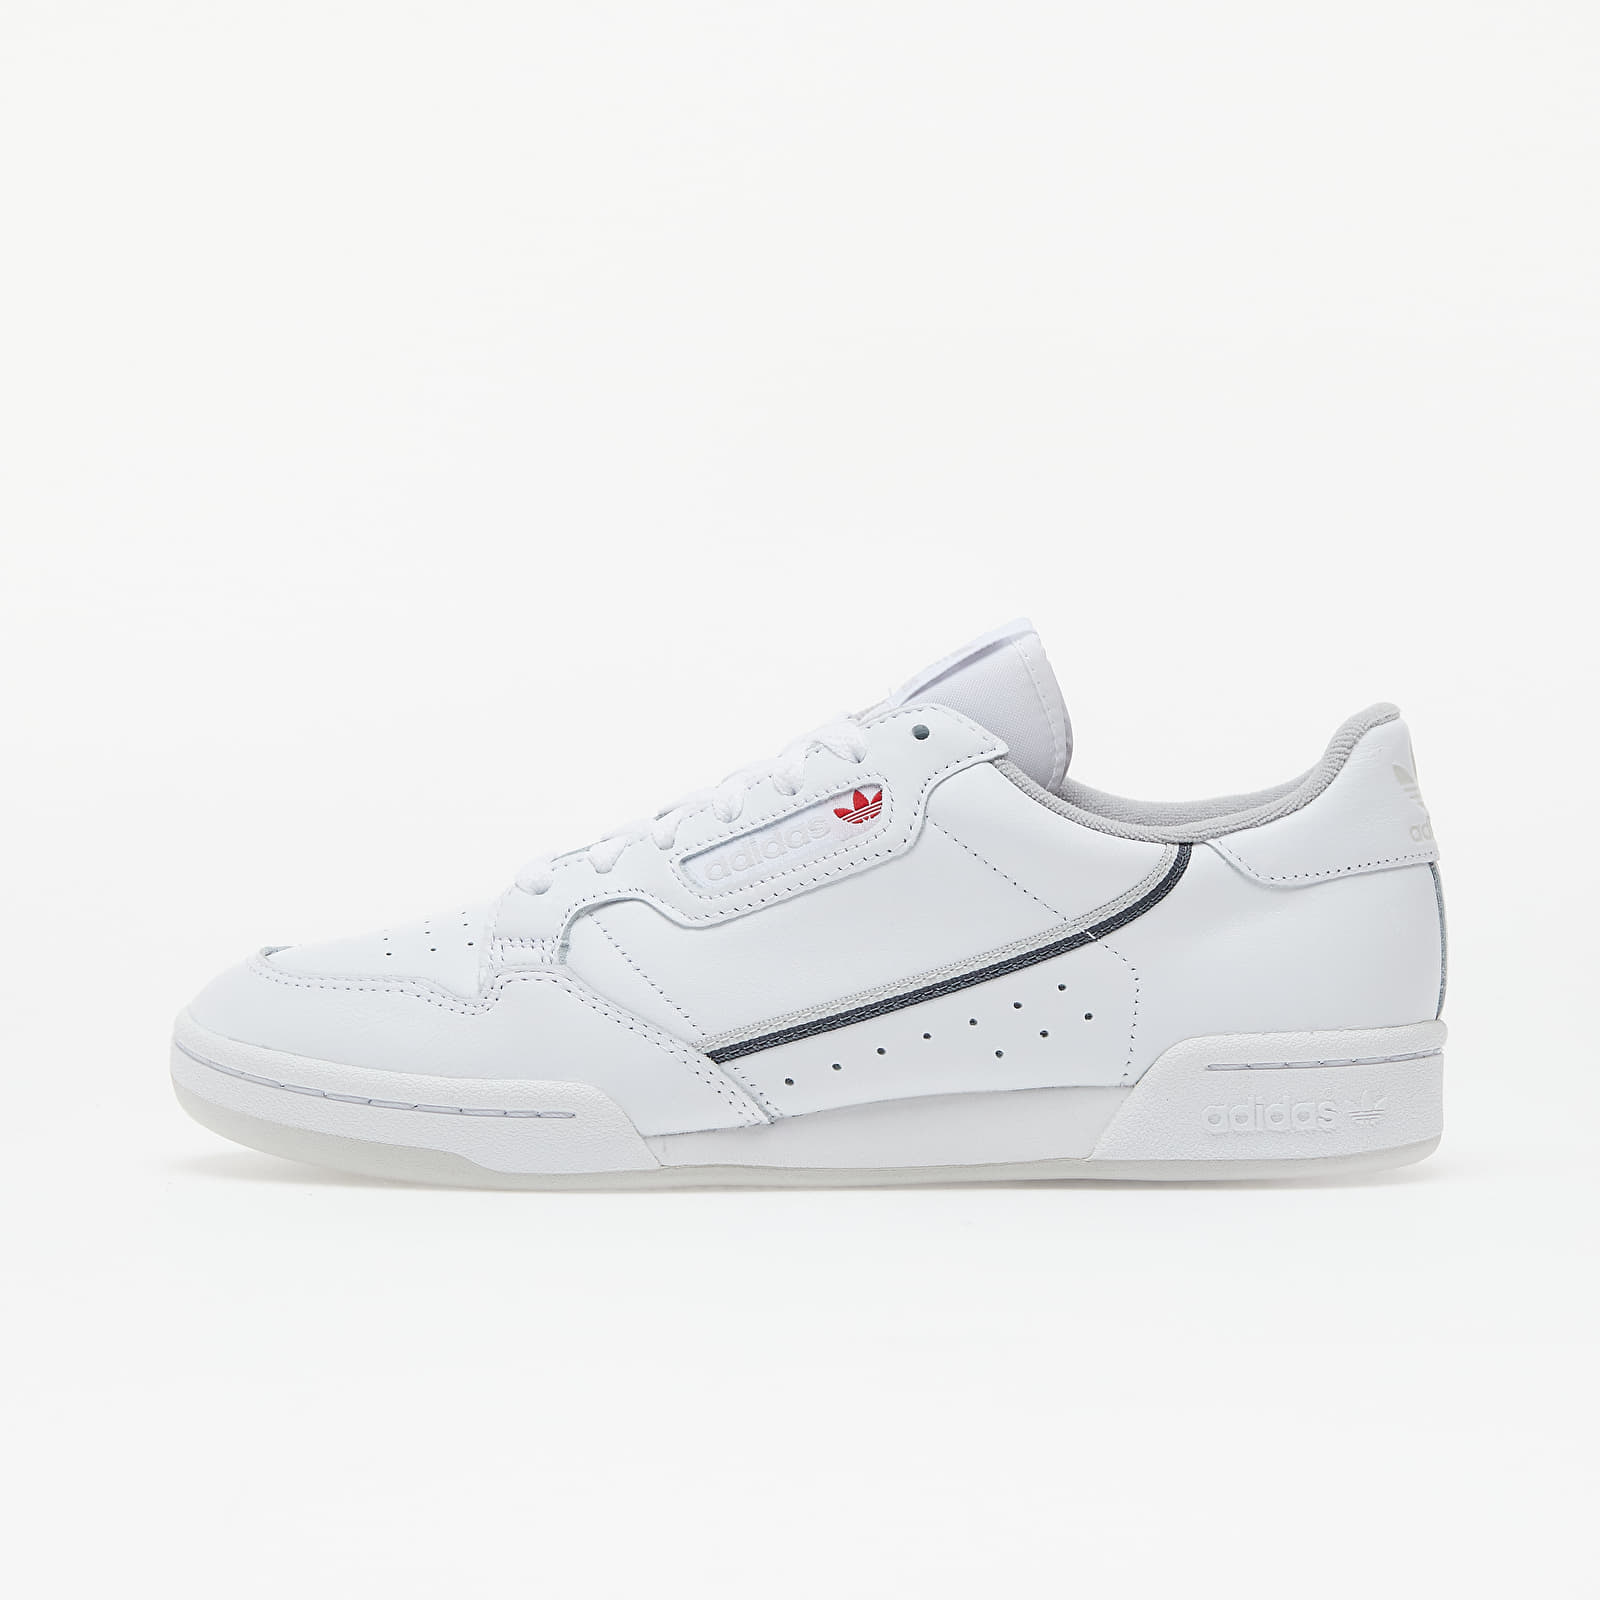 Chaussures et baskets homme adidas Continental 80 Ftw White/ Grey Five/ Grey One